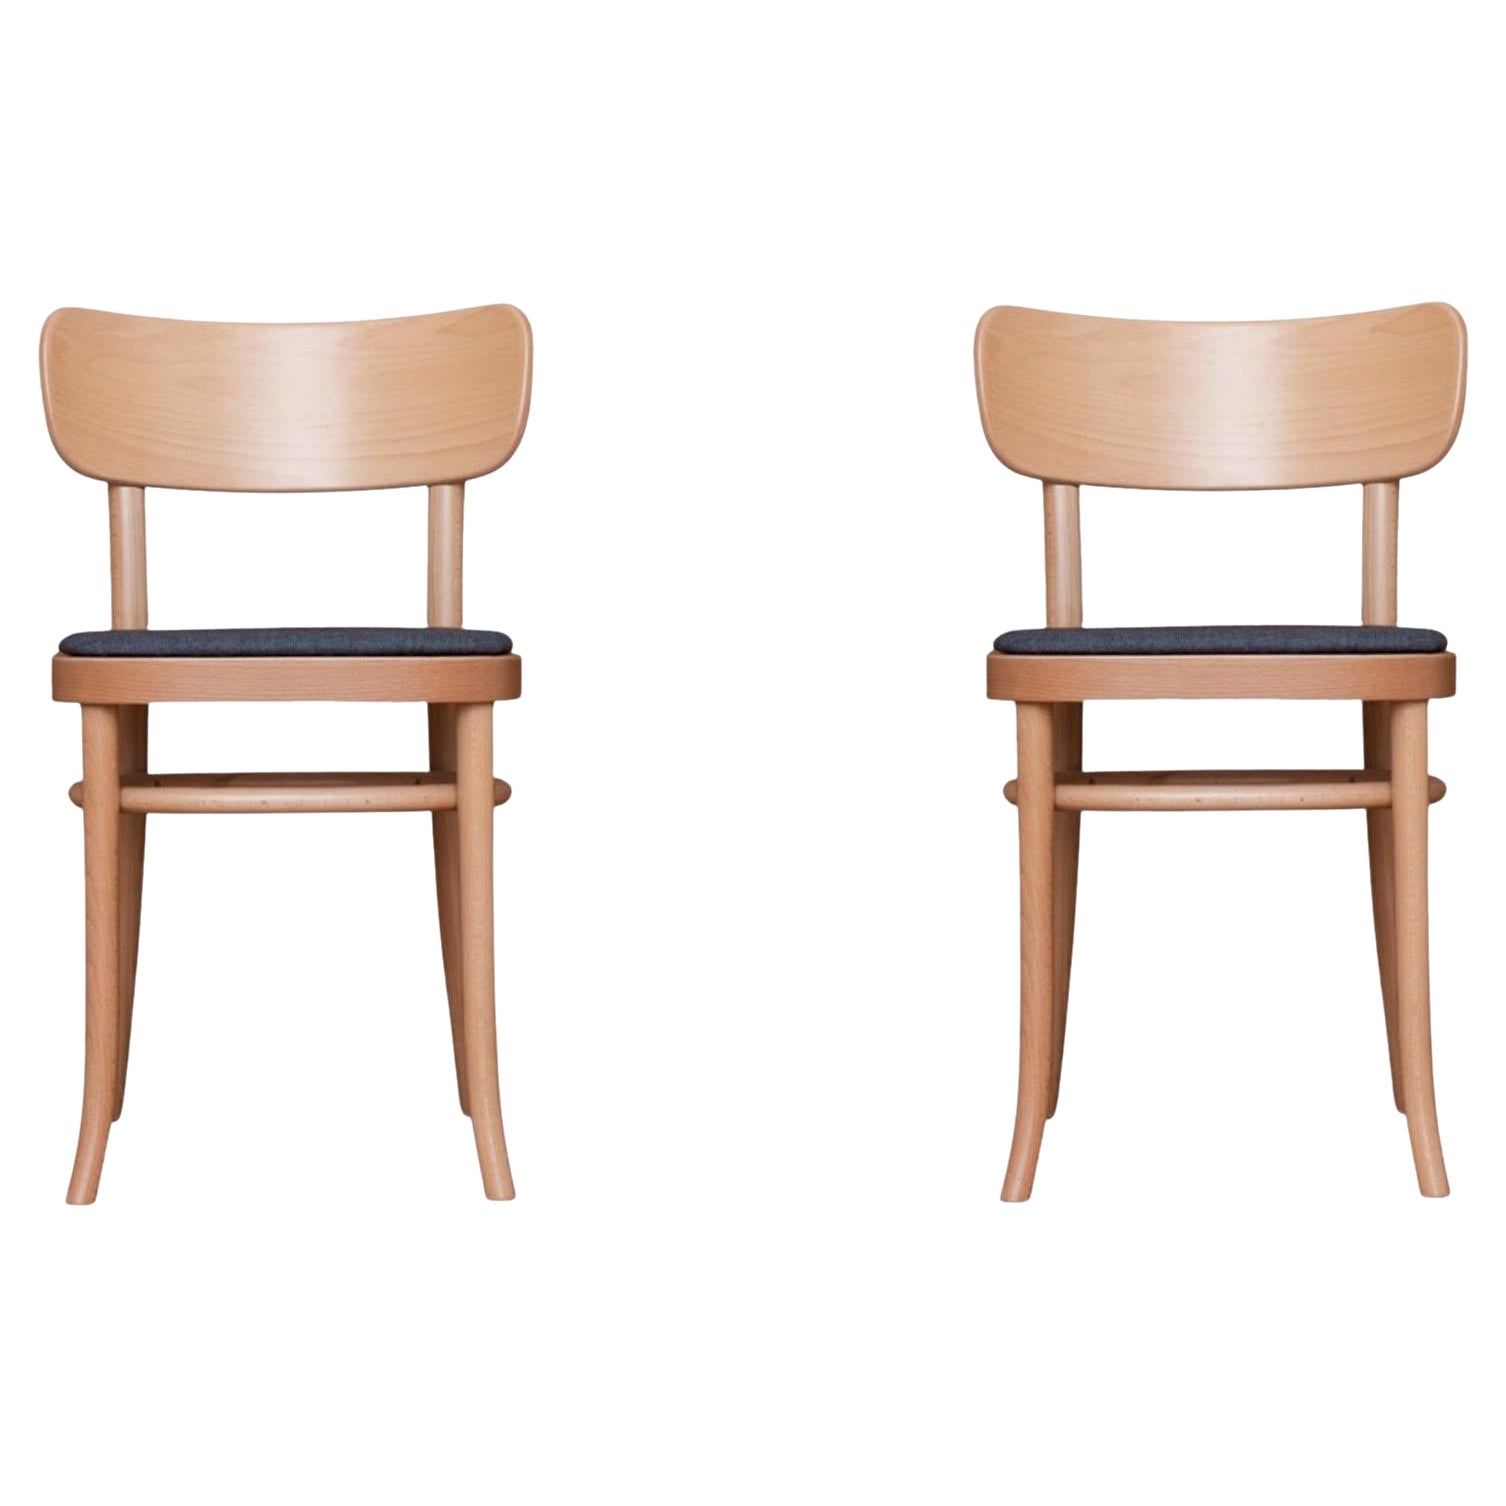 Set of 2 MZO Chairs by Mazo Design